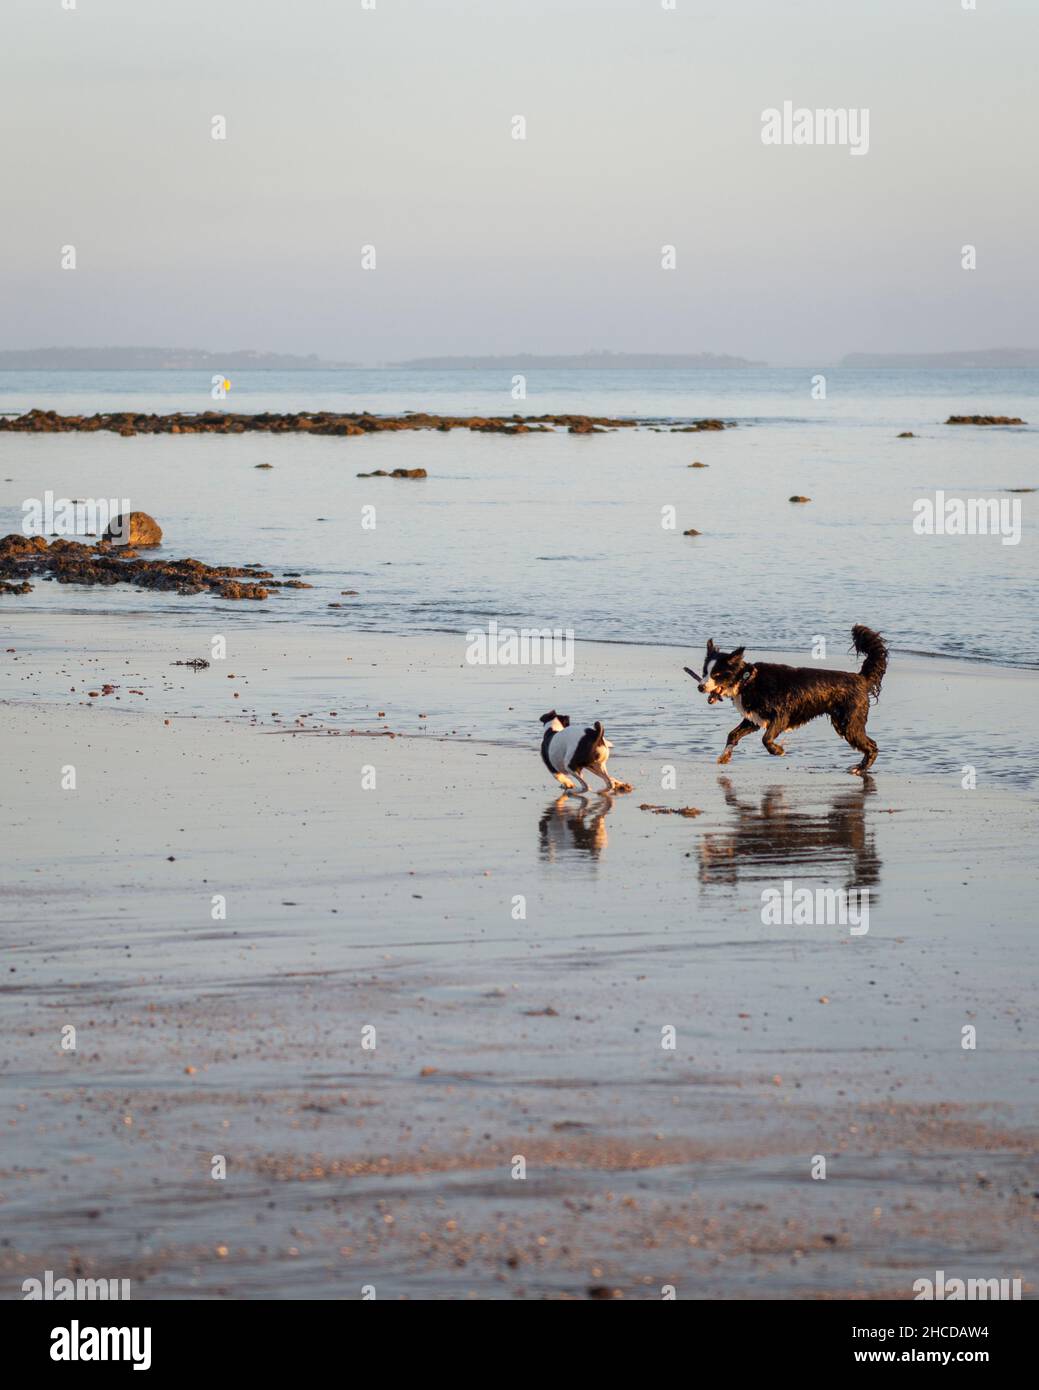 Two dogs playing with a stick, running on the wet sandy beach. Vertical format. Stock Photo